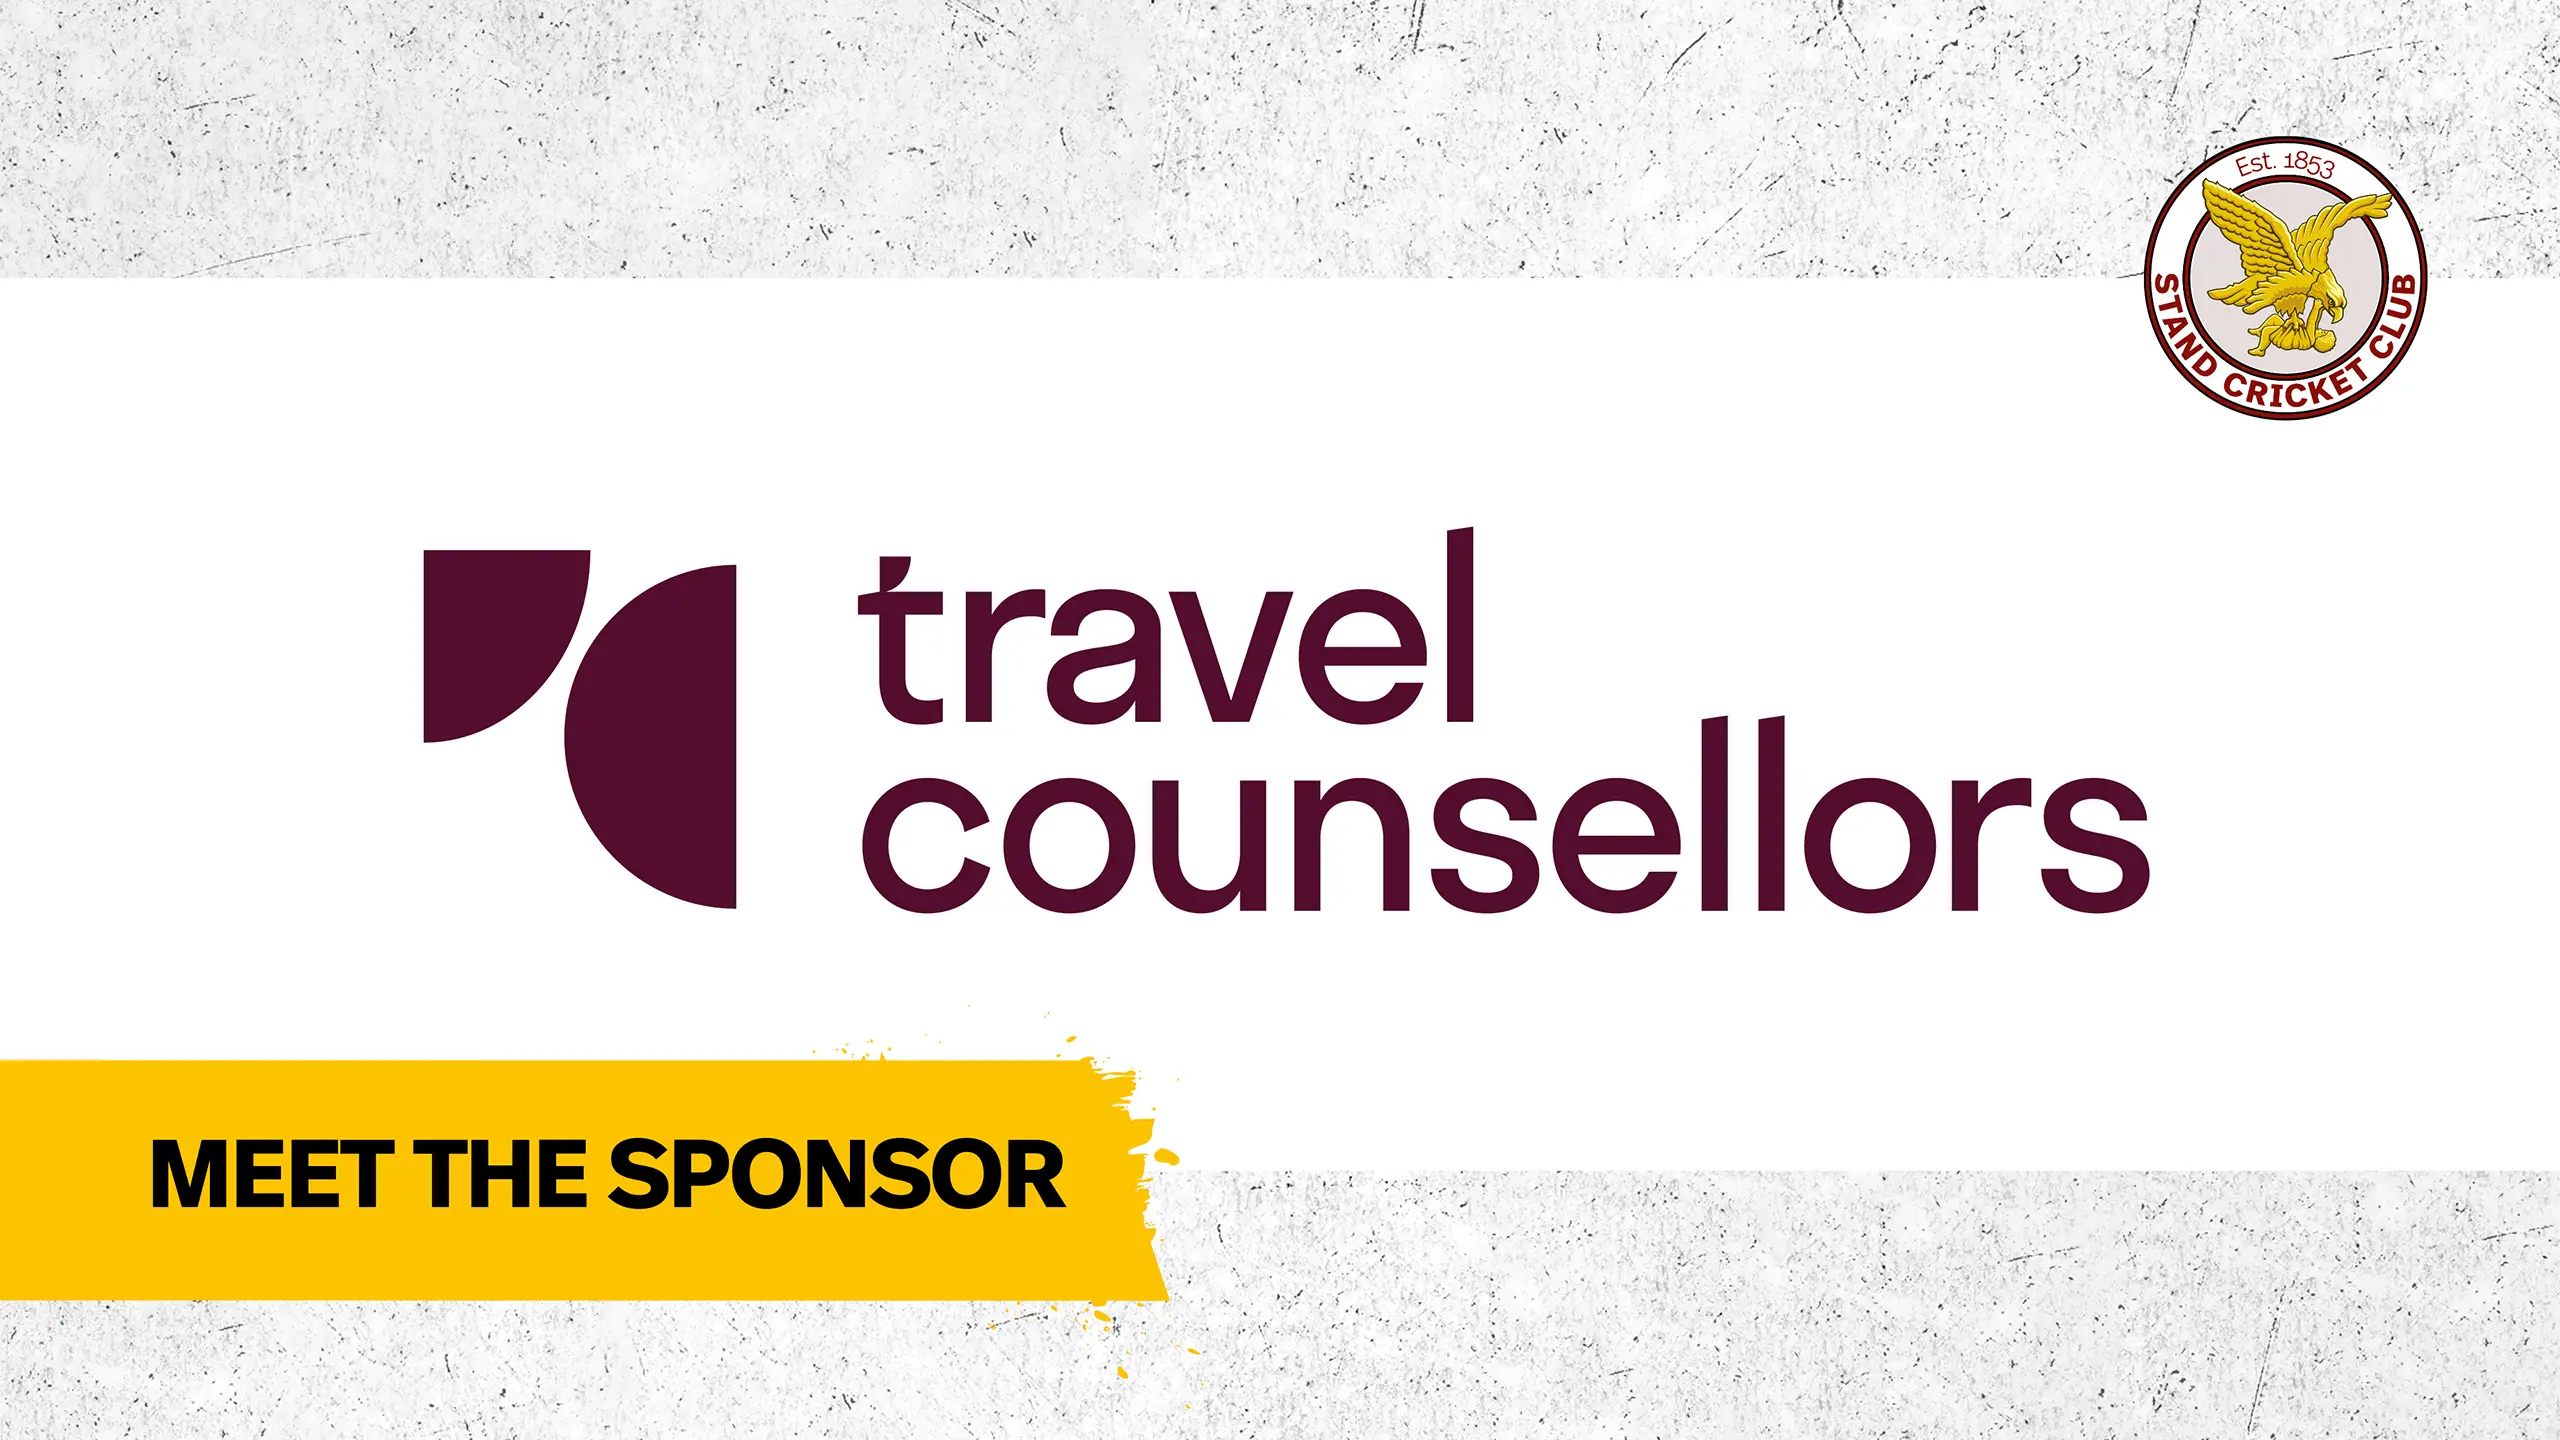 Tracy Horsfield Travel Counsellor